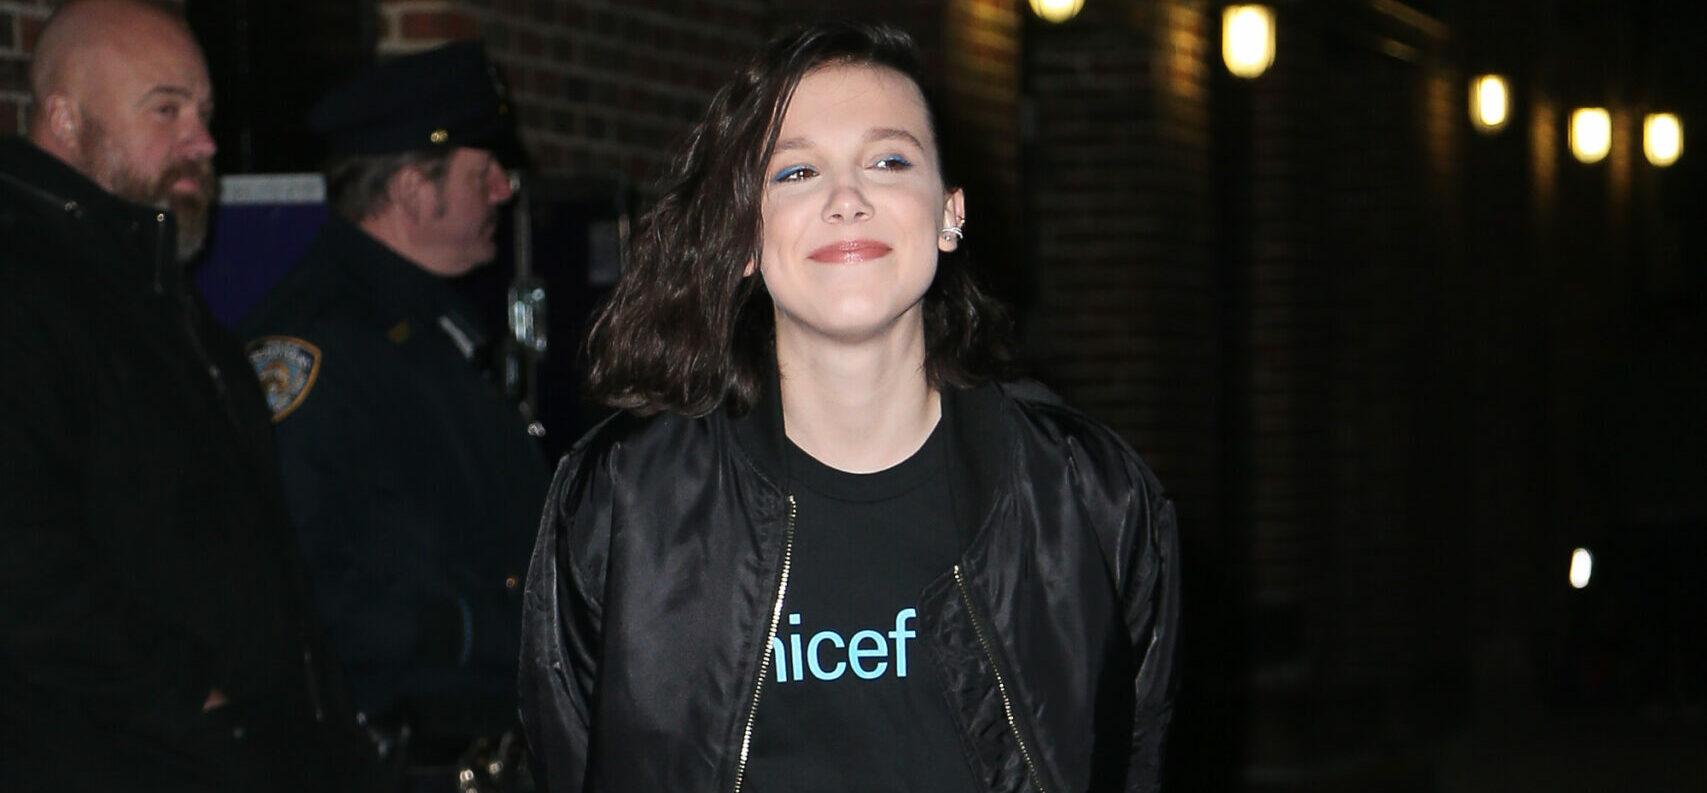 Millie Bobby Brown is seen arriving at the Stephen Colbert Show